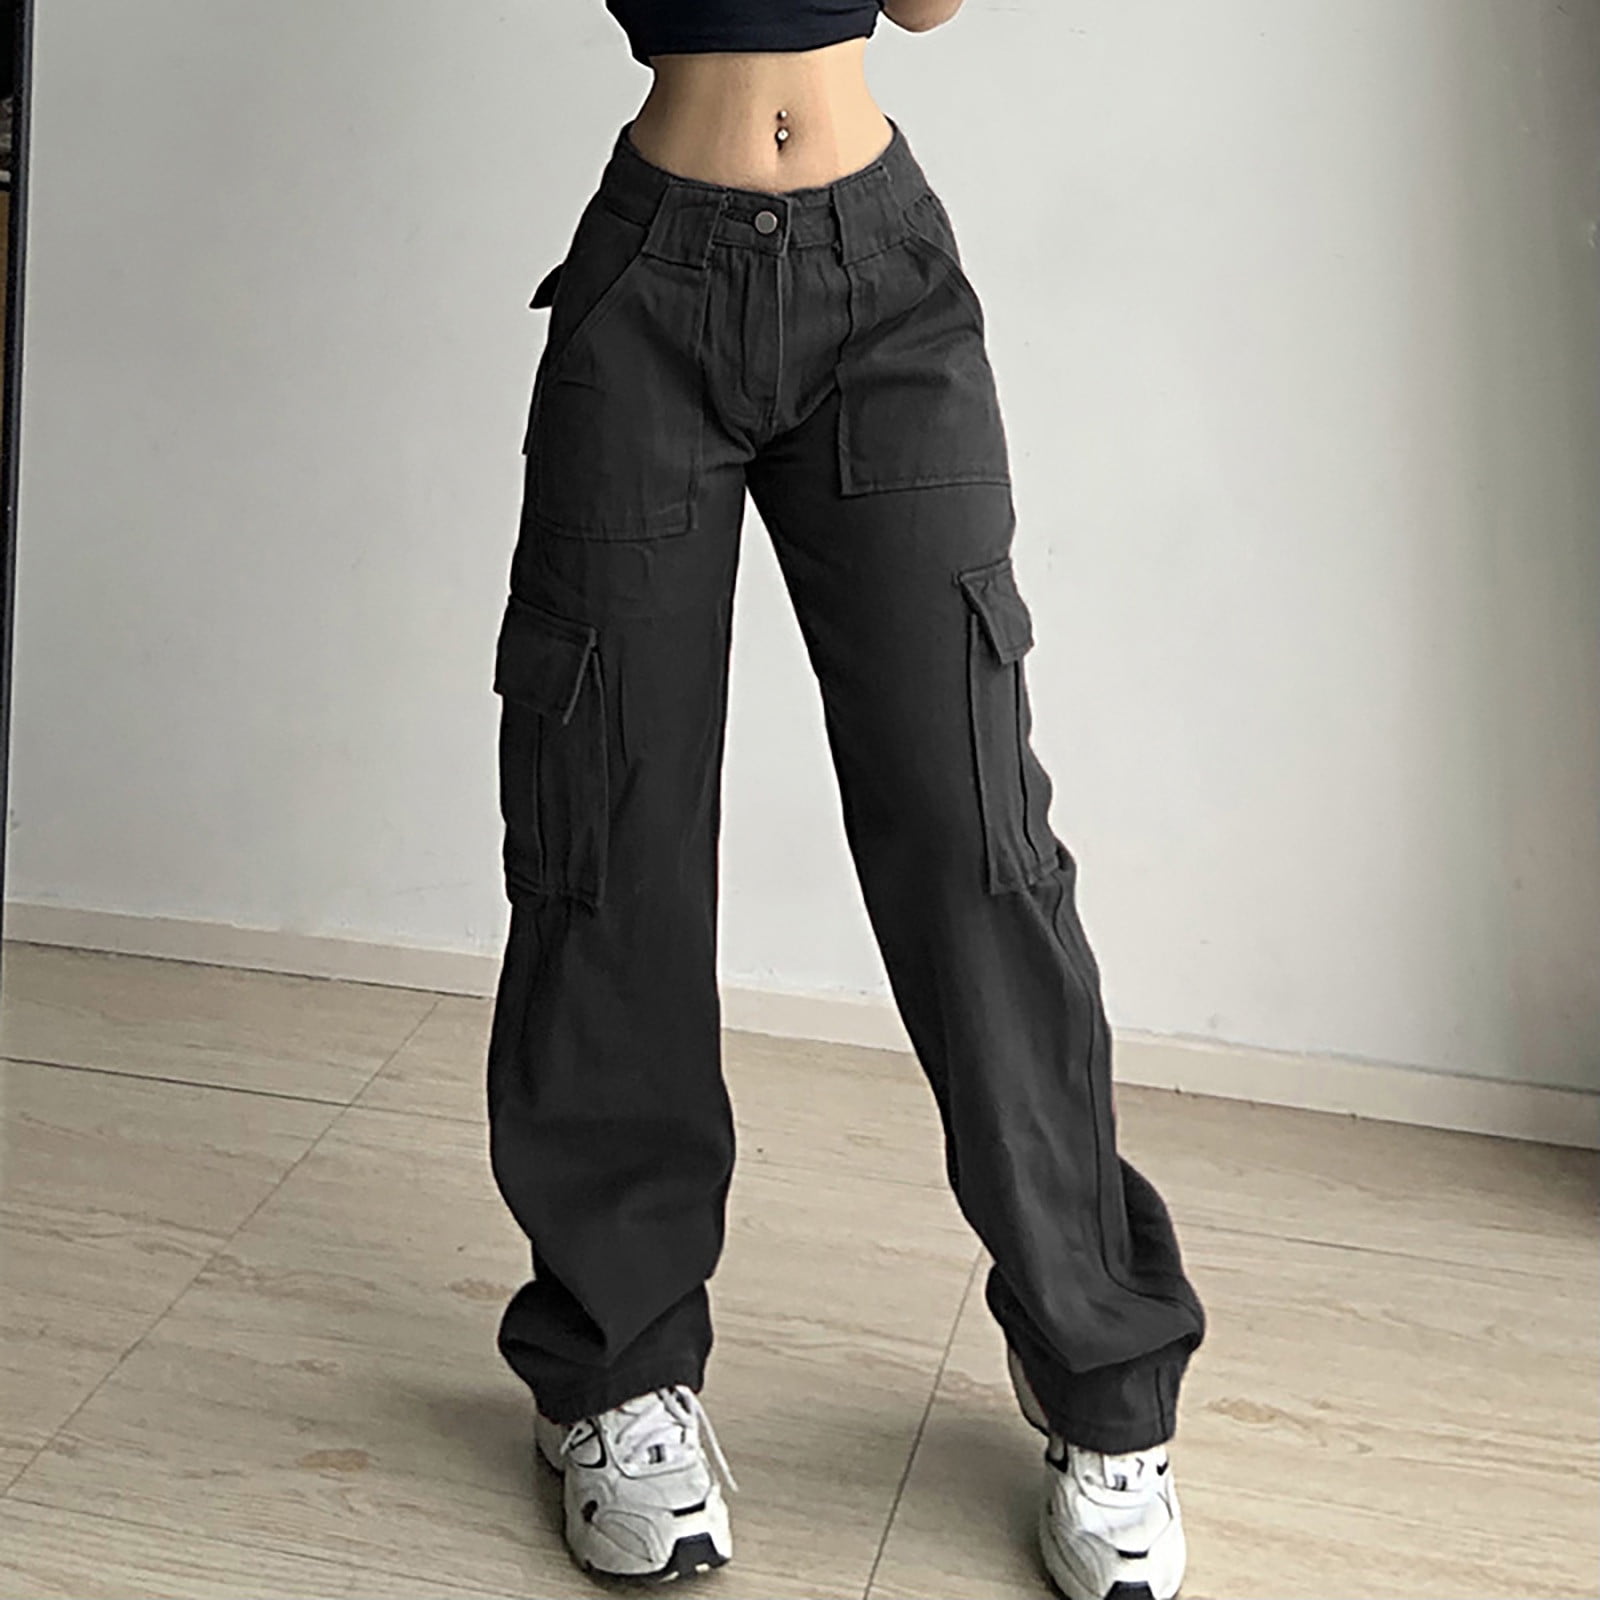 Jyeity Fall New Arrivals, Long Pants With Loose Fitting Waistband Work Suit  Straight Leg Jeans For Women Fanka Leggings Black Size M(US:6) 